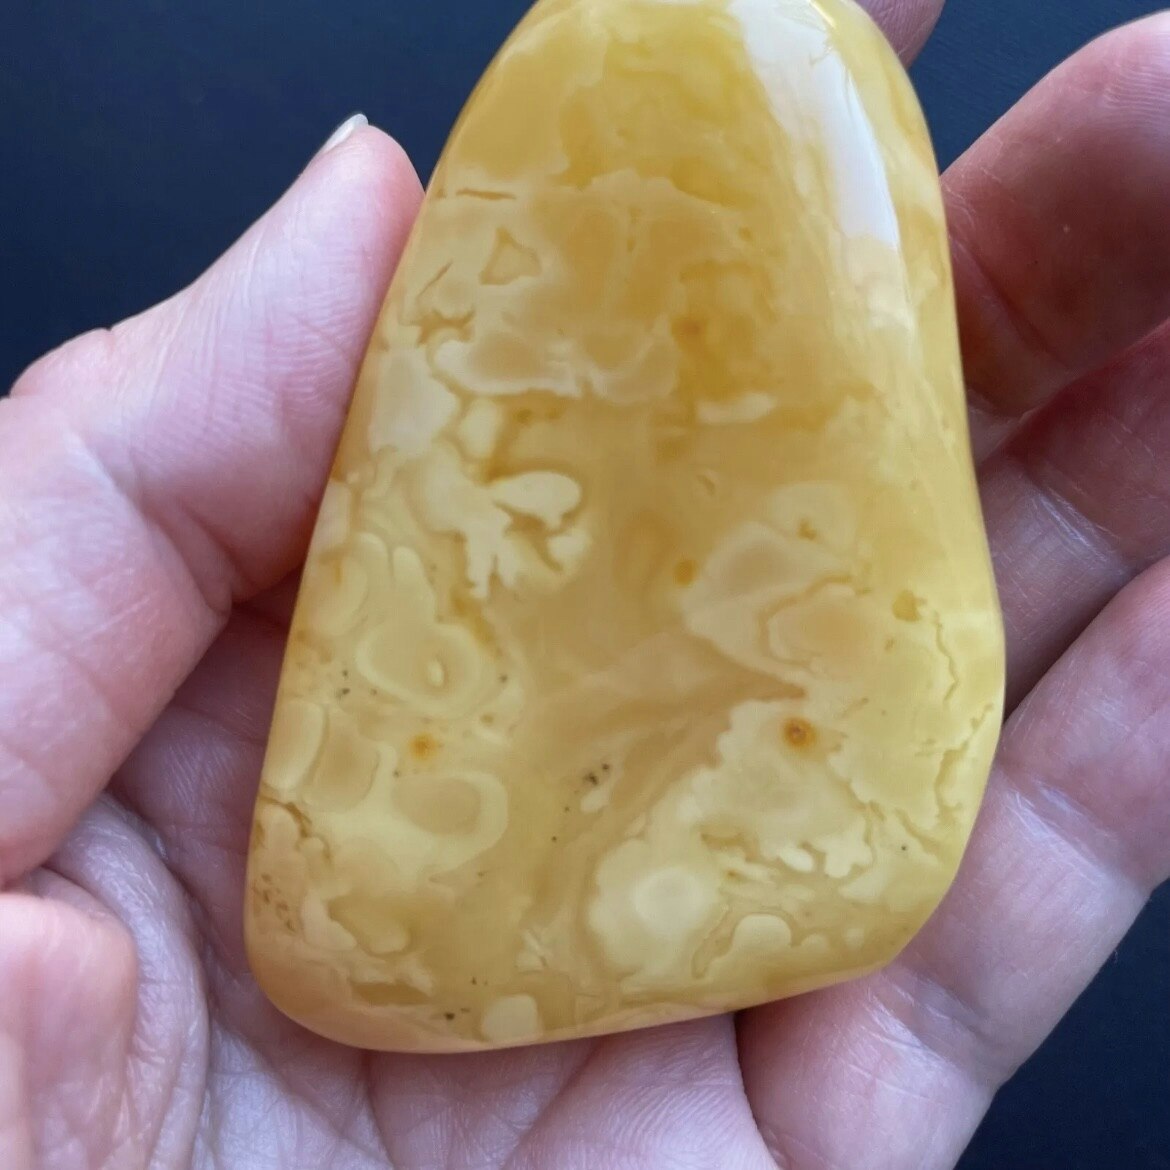 Natural amber pendant from Denmark baltic amber hand polished big 39g